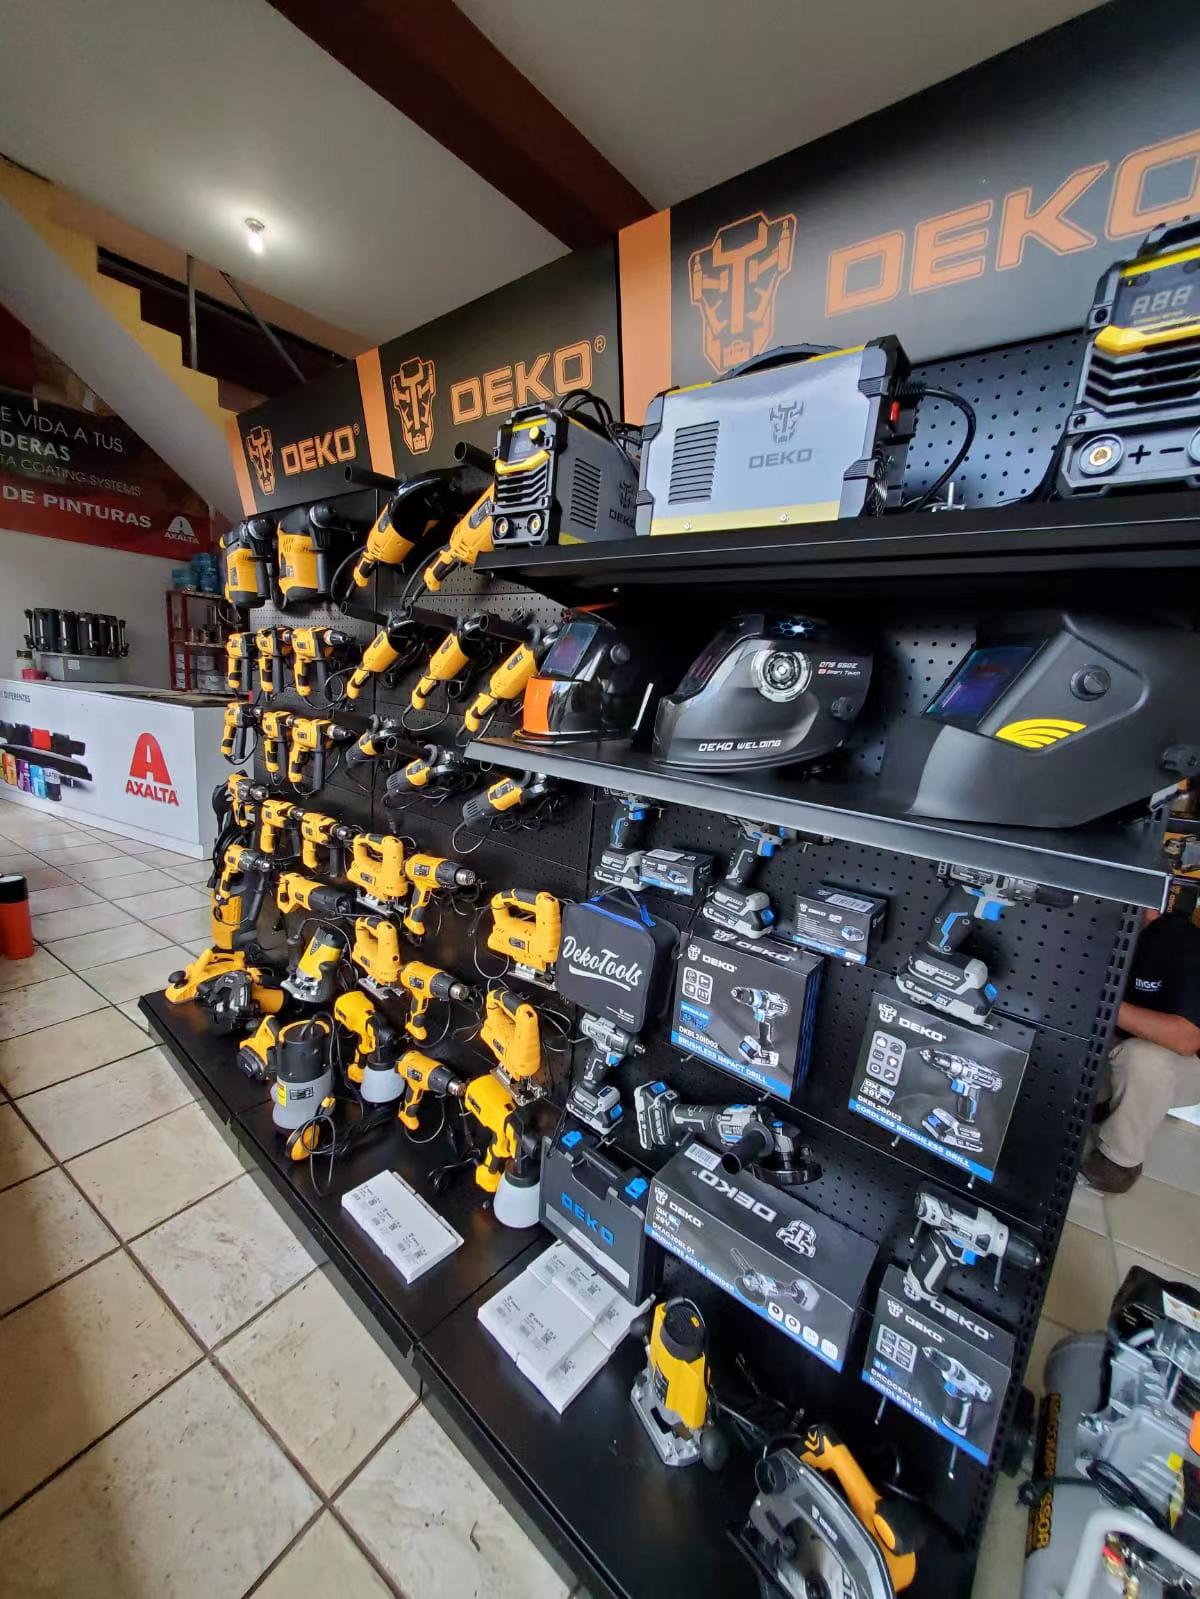 Staff and display stand of power tool supplier DEKO Tools exclusive distributor